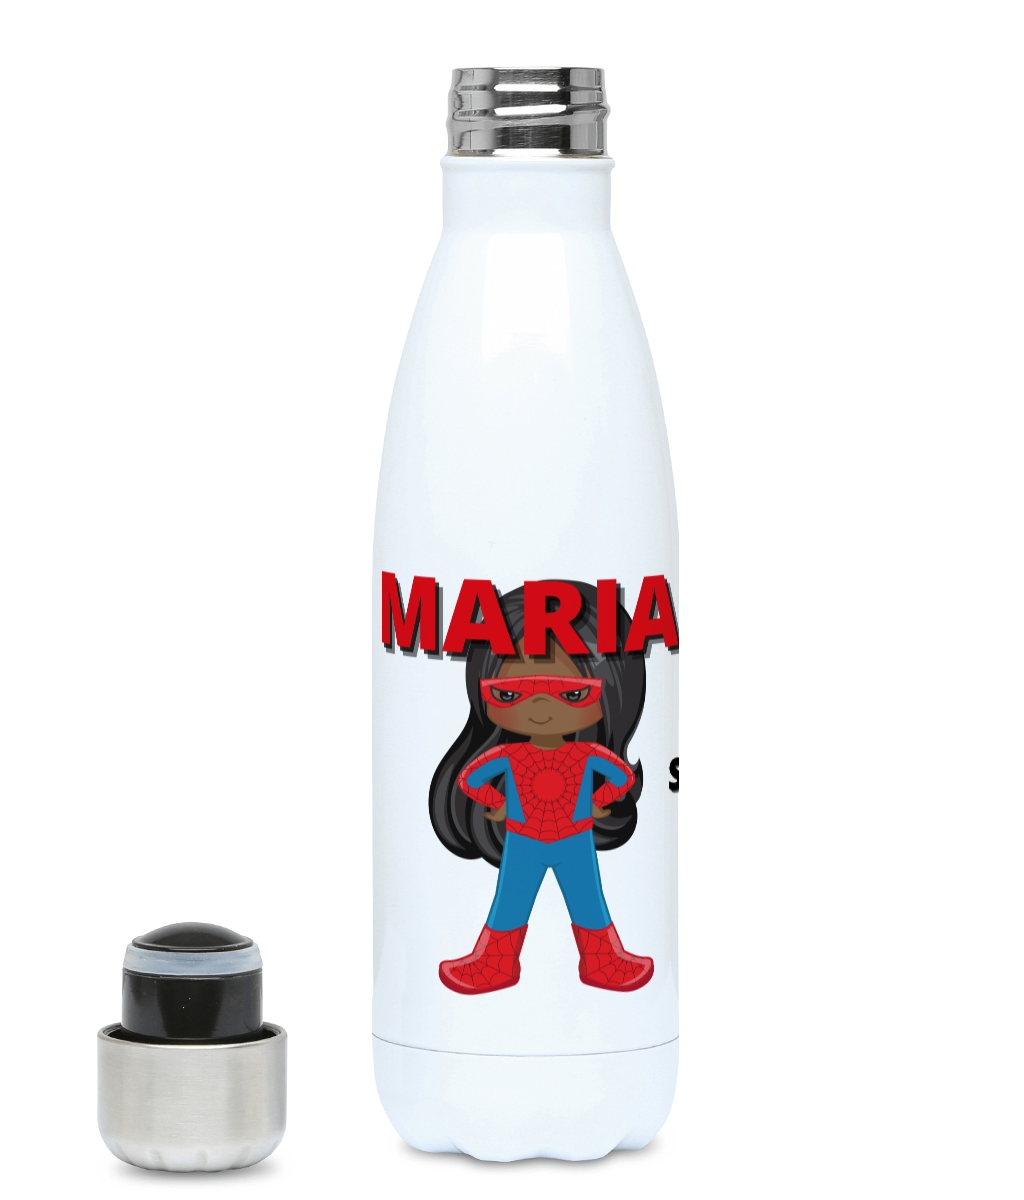 Personalised BlacklikeMe Spidey Superheroine personalised hydro flask. The picture features a hydro flask that has been personalised with the name Maria